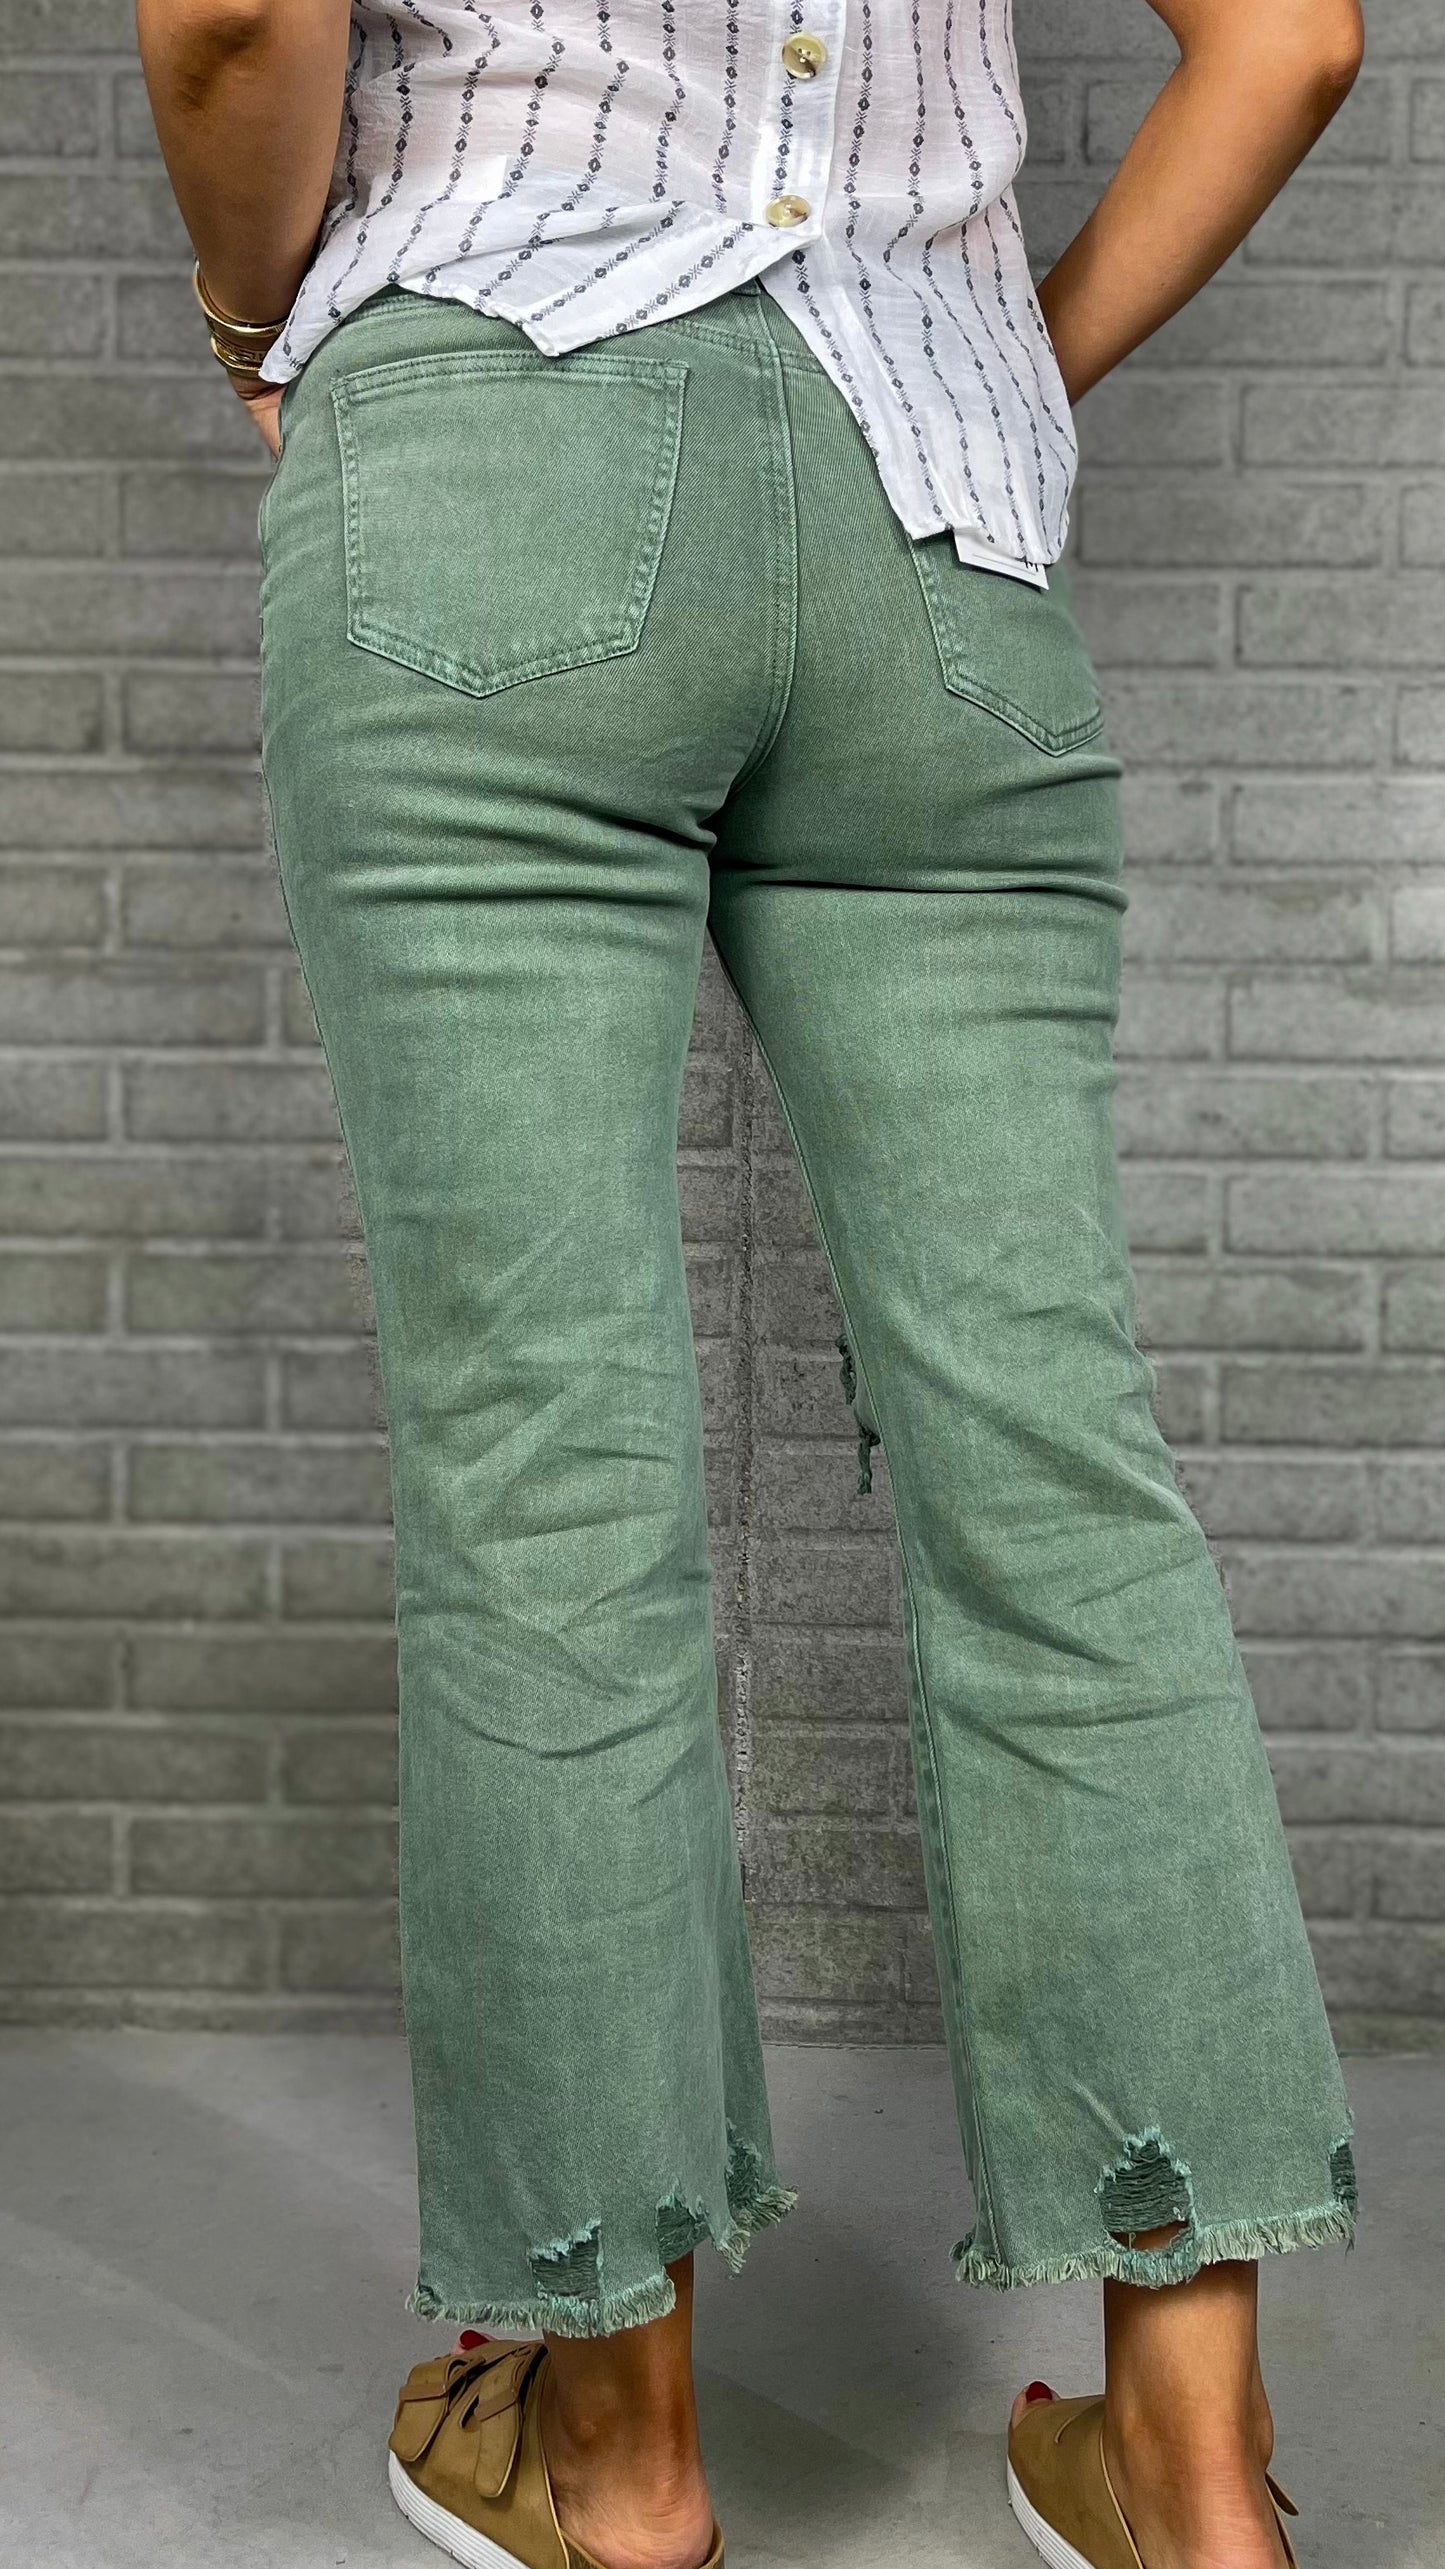 Stick It Out Olive Green Jeans